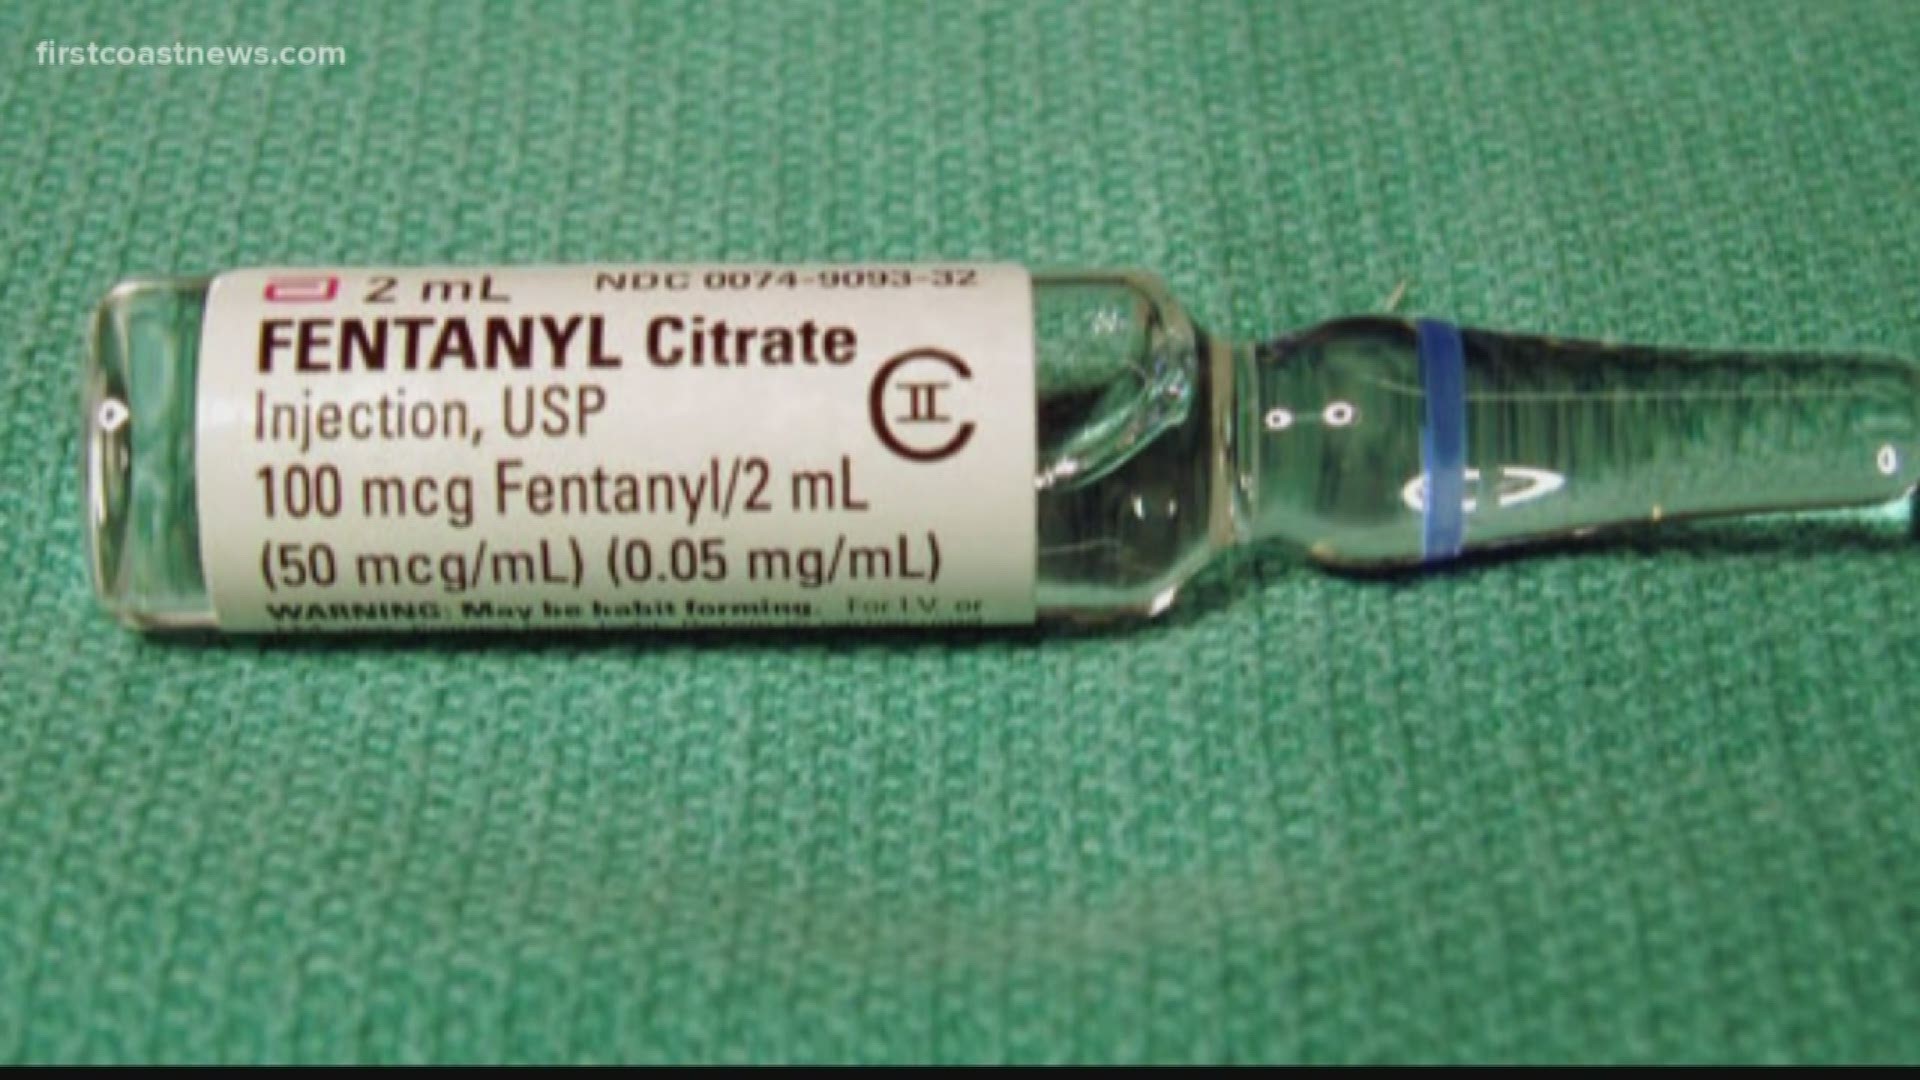 The Center for Disease Control found that the largest rise in fentanyl-related deaths was among teens, young adults, and African Americans.